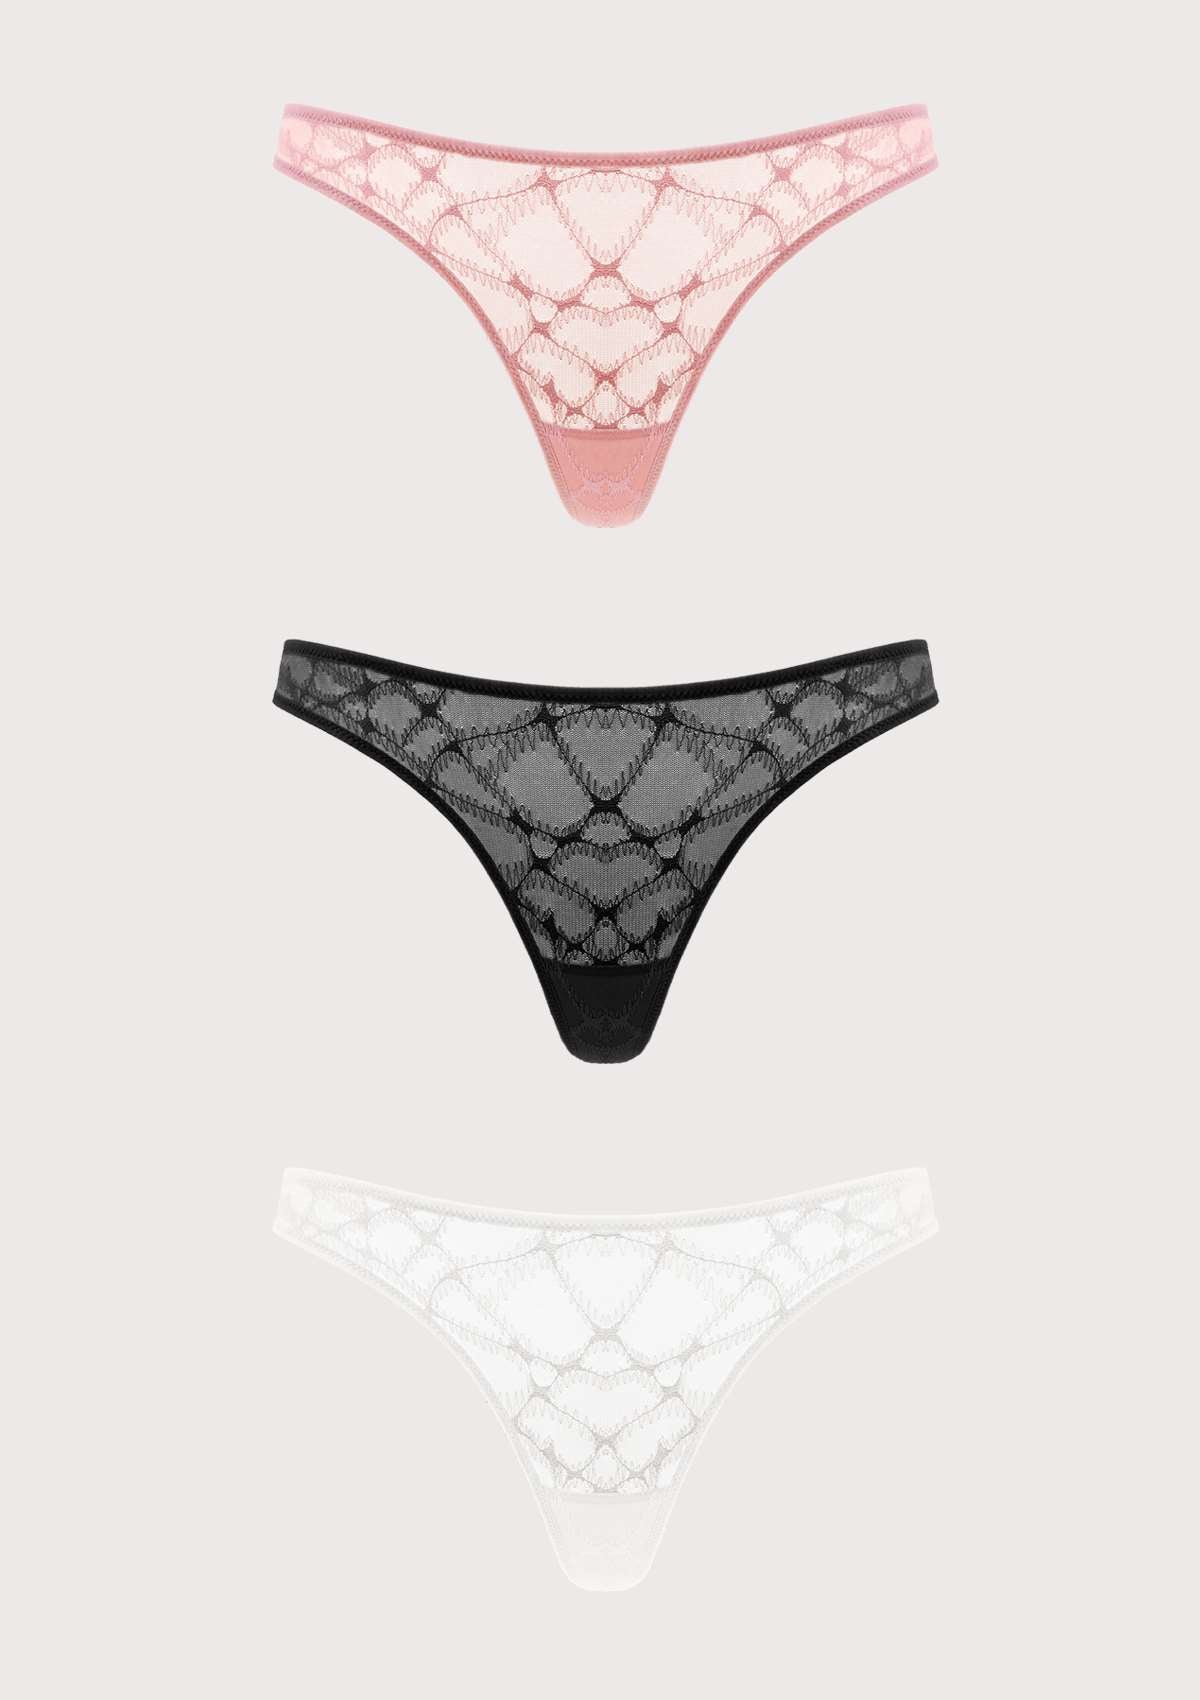 HSIA Soft Sexy Mesh Thong Underwear 3 Pack - L / Black+White+Light Coral